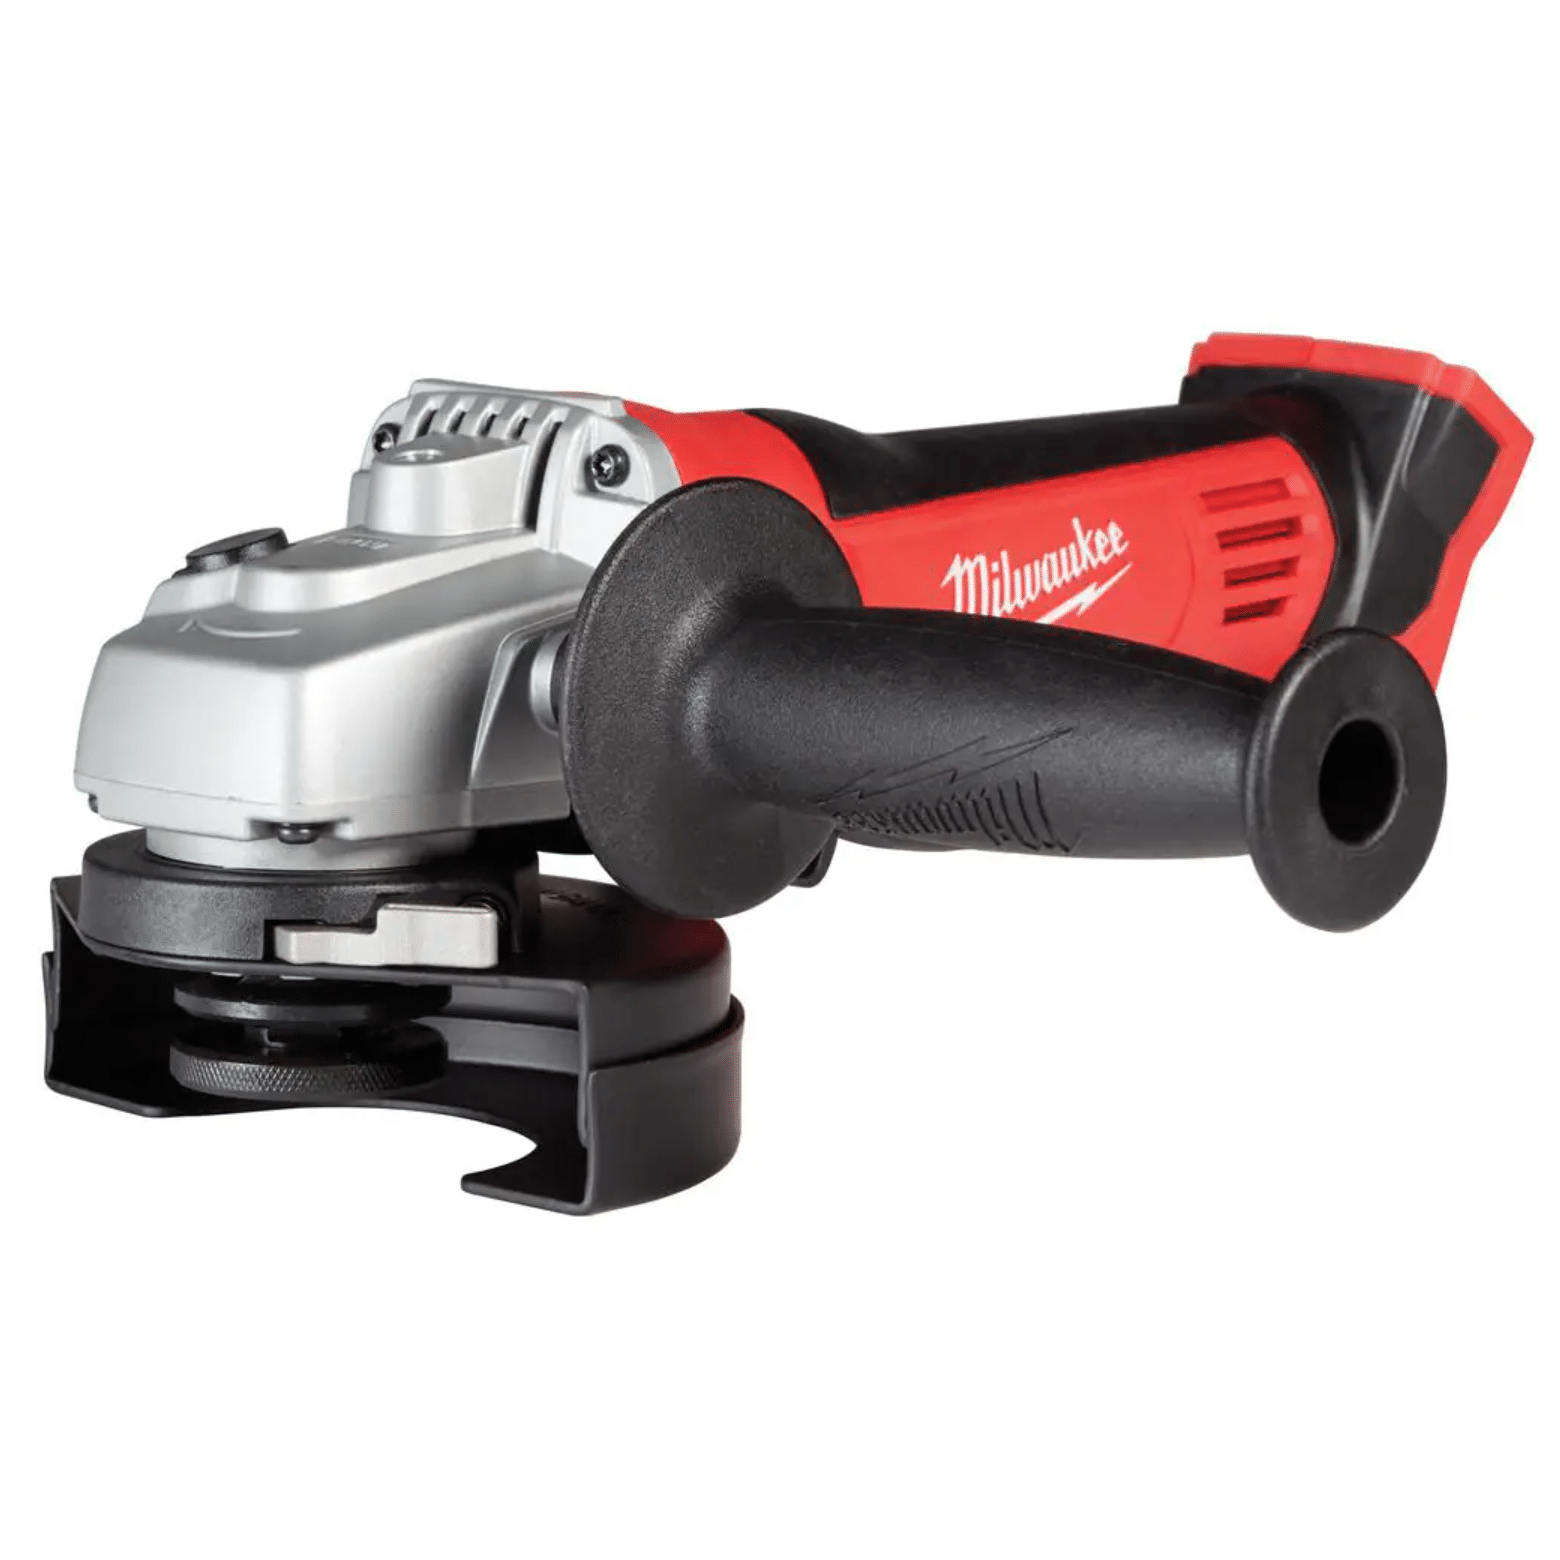 Milwaukee M18 18-Volt Lithium-Ion Cordless 4-1/2 in. Cut-Off/Grinder, Tool-Only (2680-20)